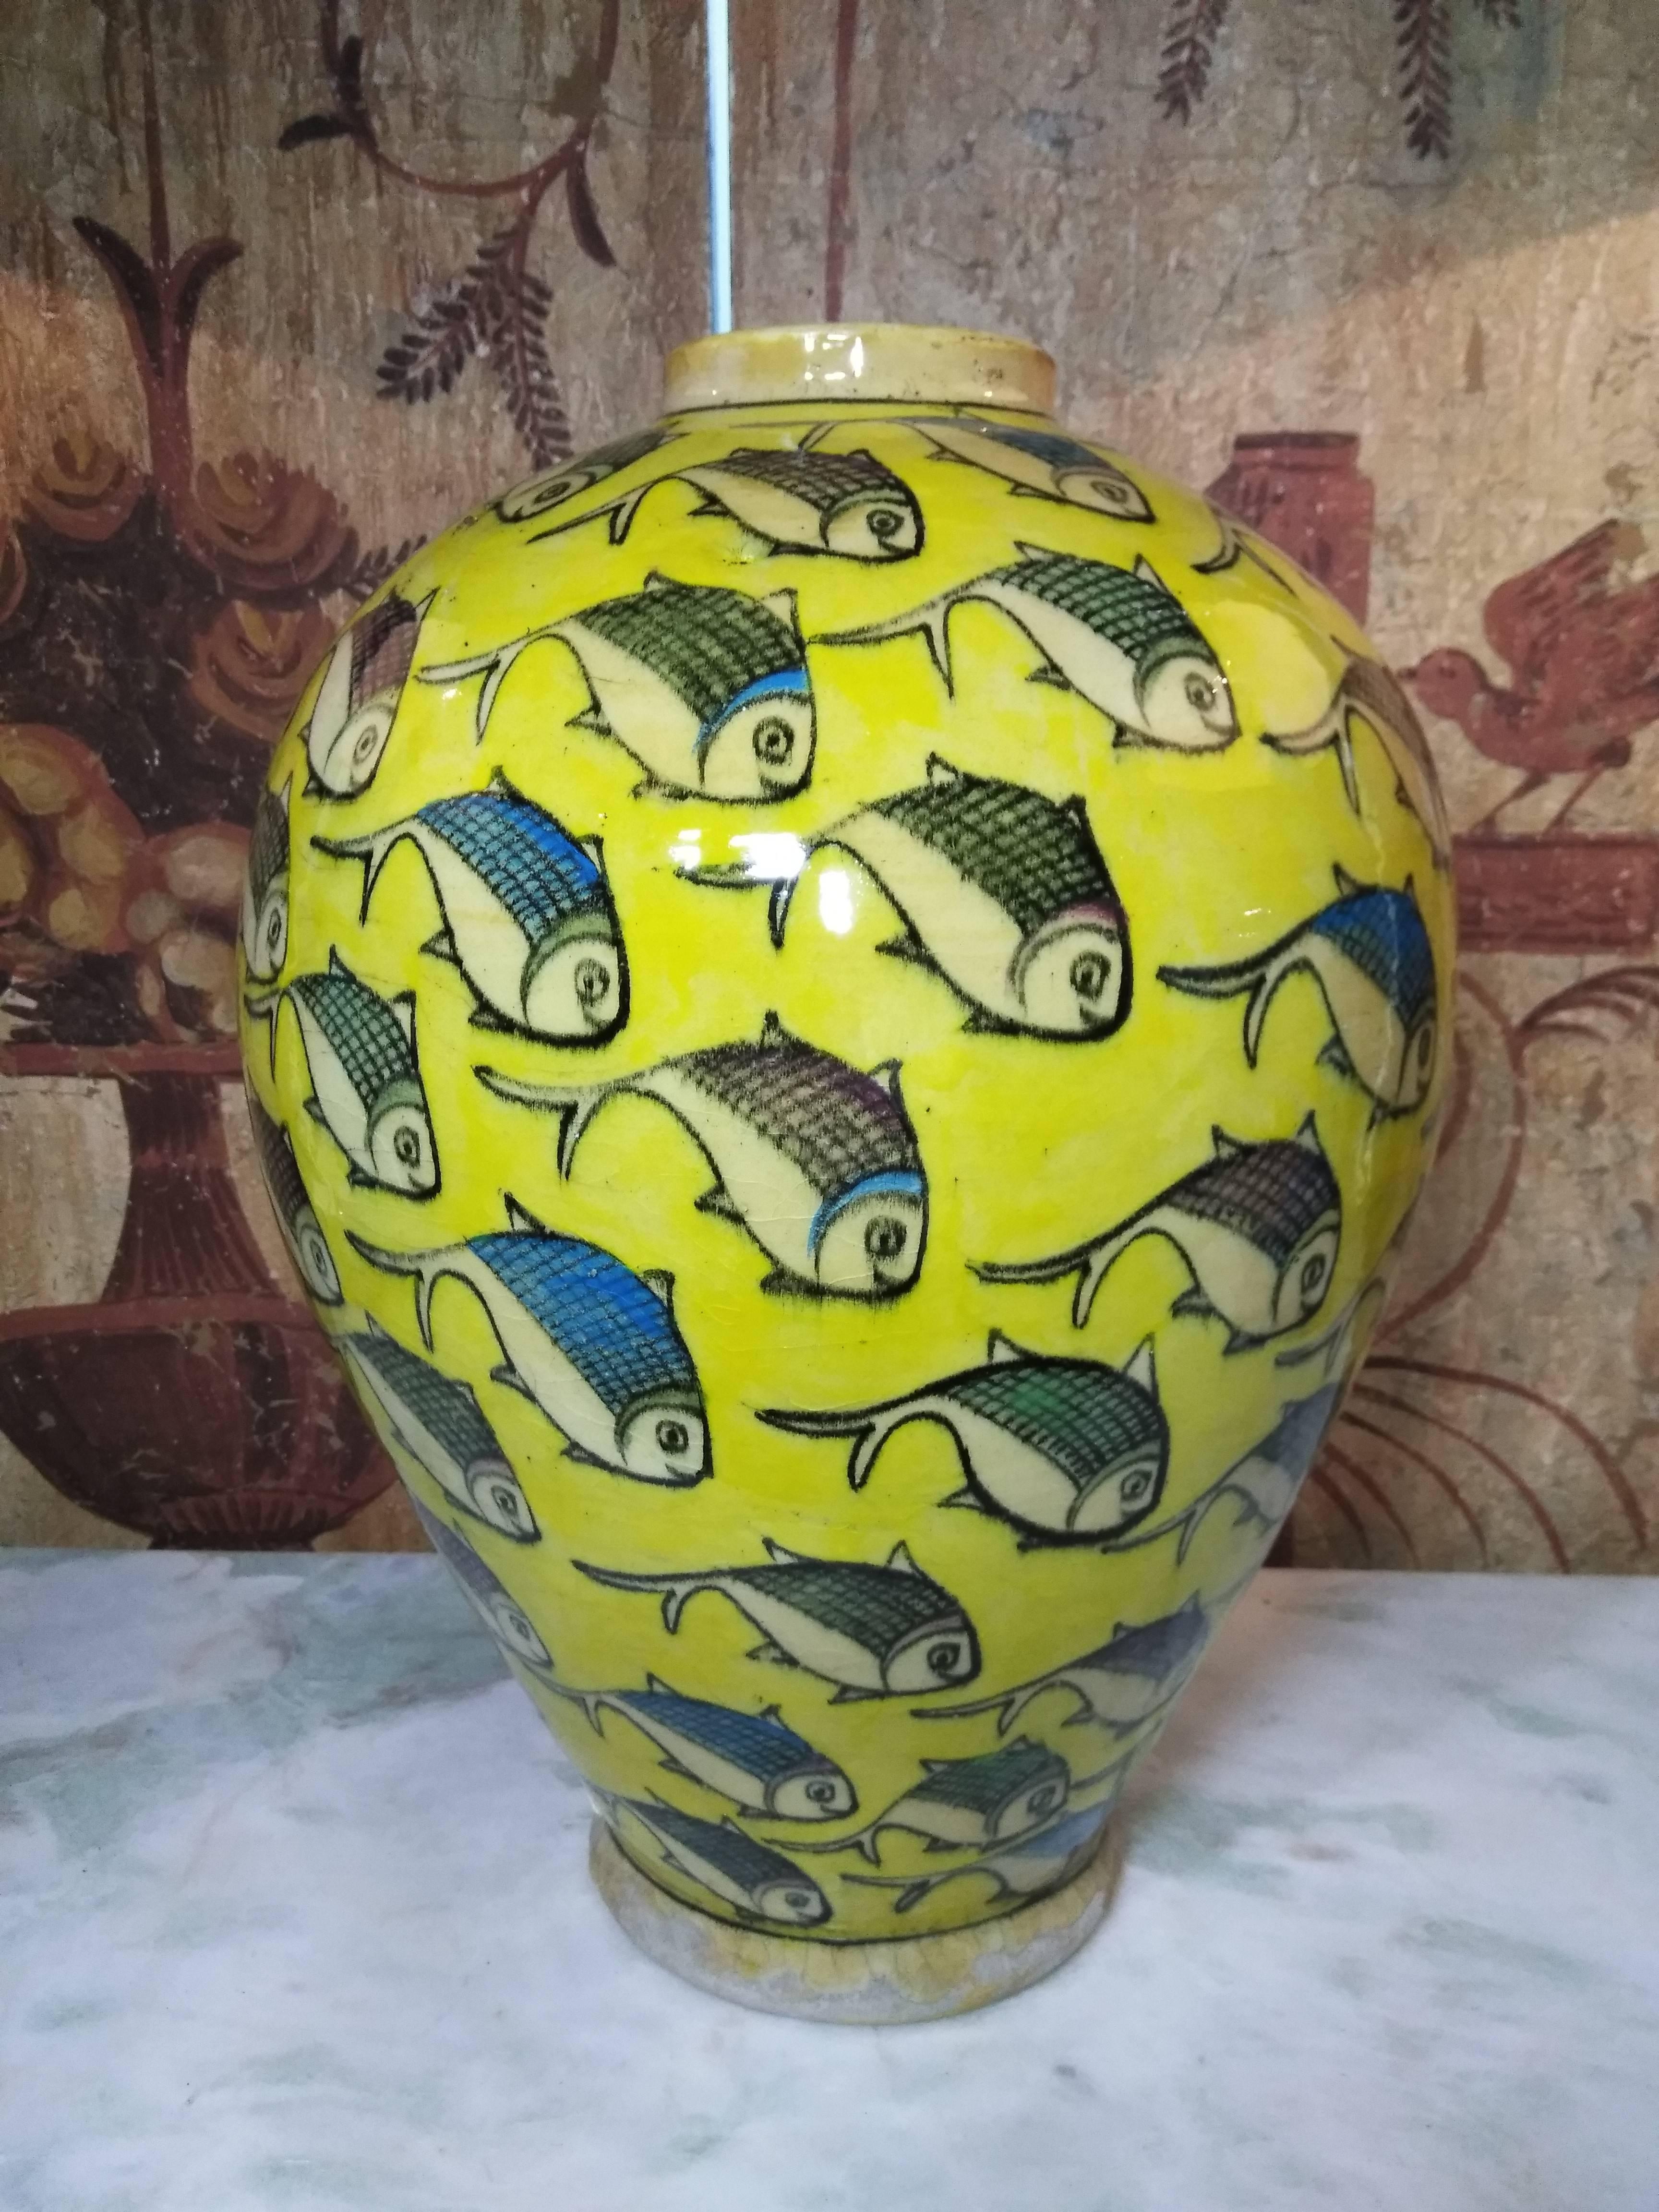 Beautiful yellow Persian ceramic vase hand-painted and glazed with colorful fish motif surrounding it. Great decorative piece of art for display.